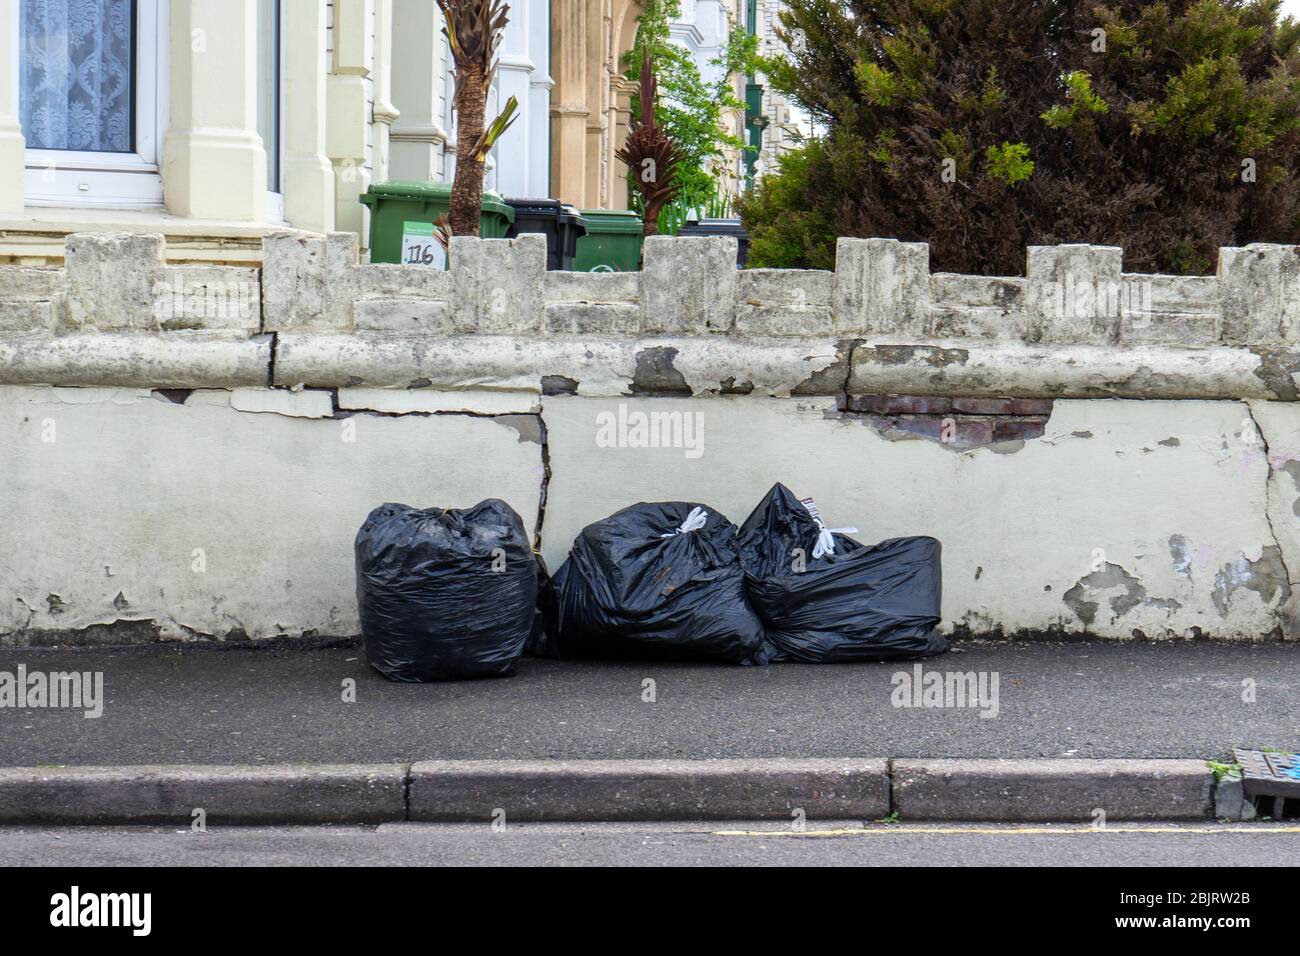 black bin bags full of rubbish on a street or pavement Stock Photo